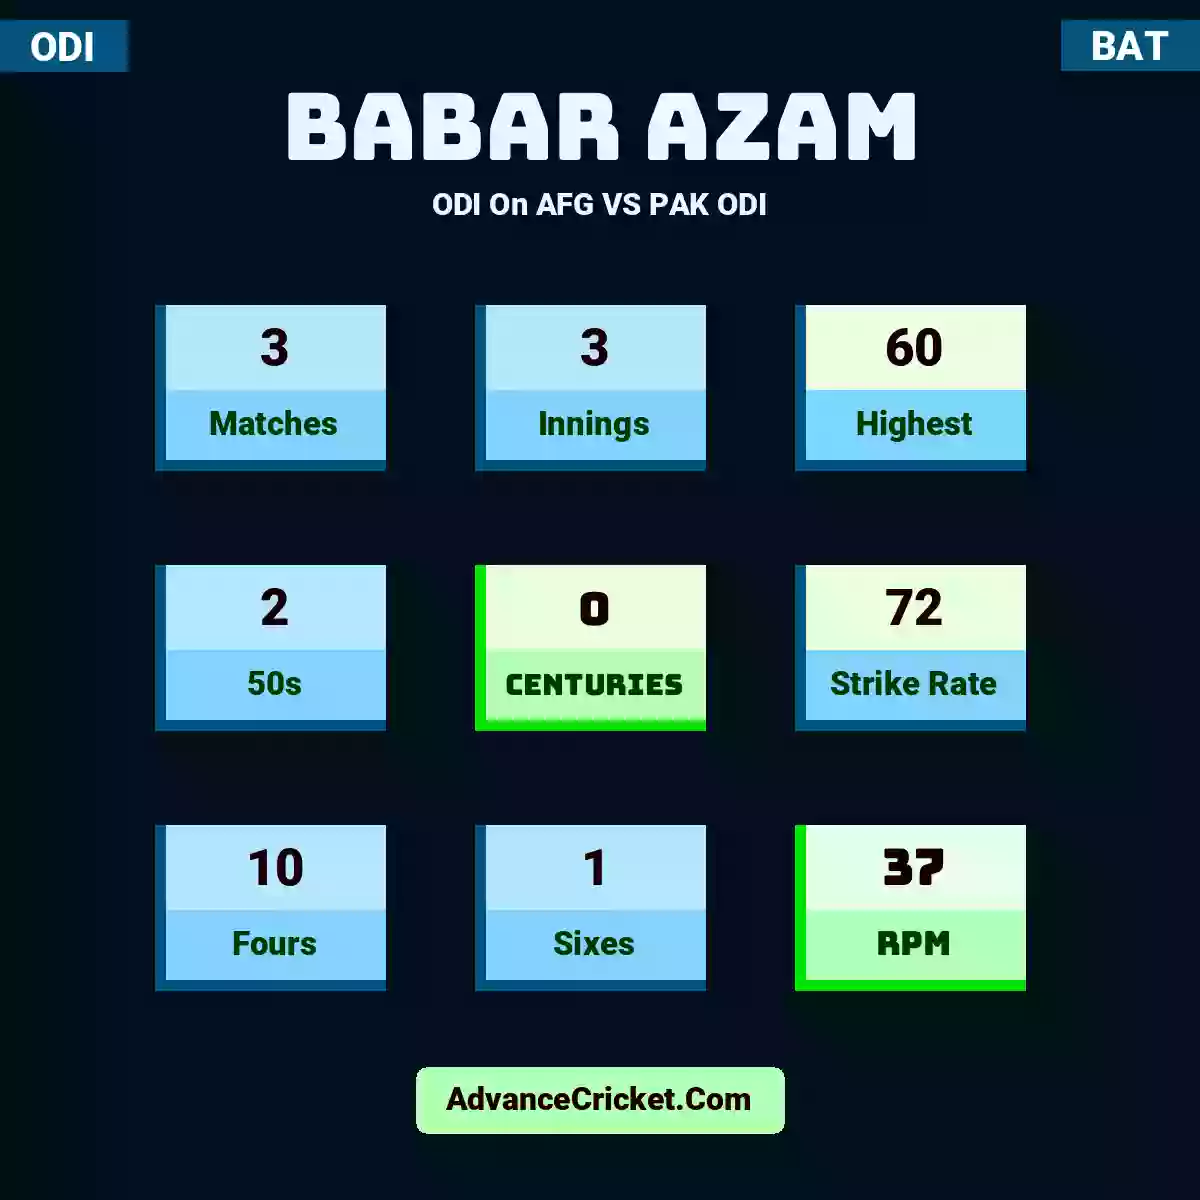 Babar Azam ODI  On AFG VS PAK ODI, Babar Azam played 3 matches, scored 60 runs as highest, 2 half-centuries, and 0 centuries, with a strike rate of 72. B.Azam hit 10 fours and 1 sixes, with an RPM of 37.